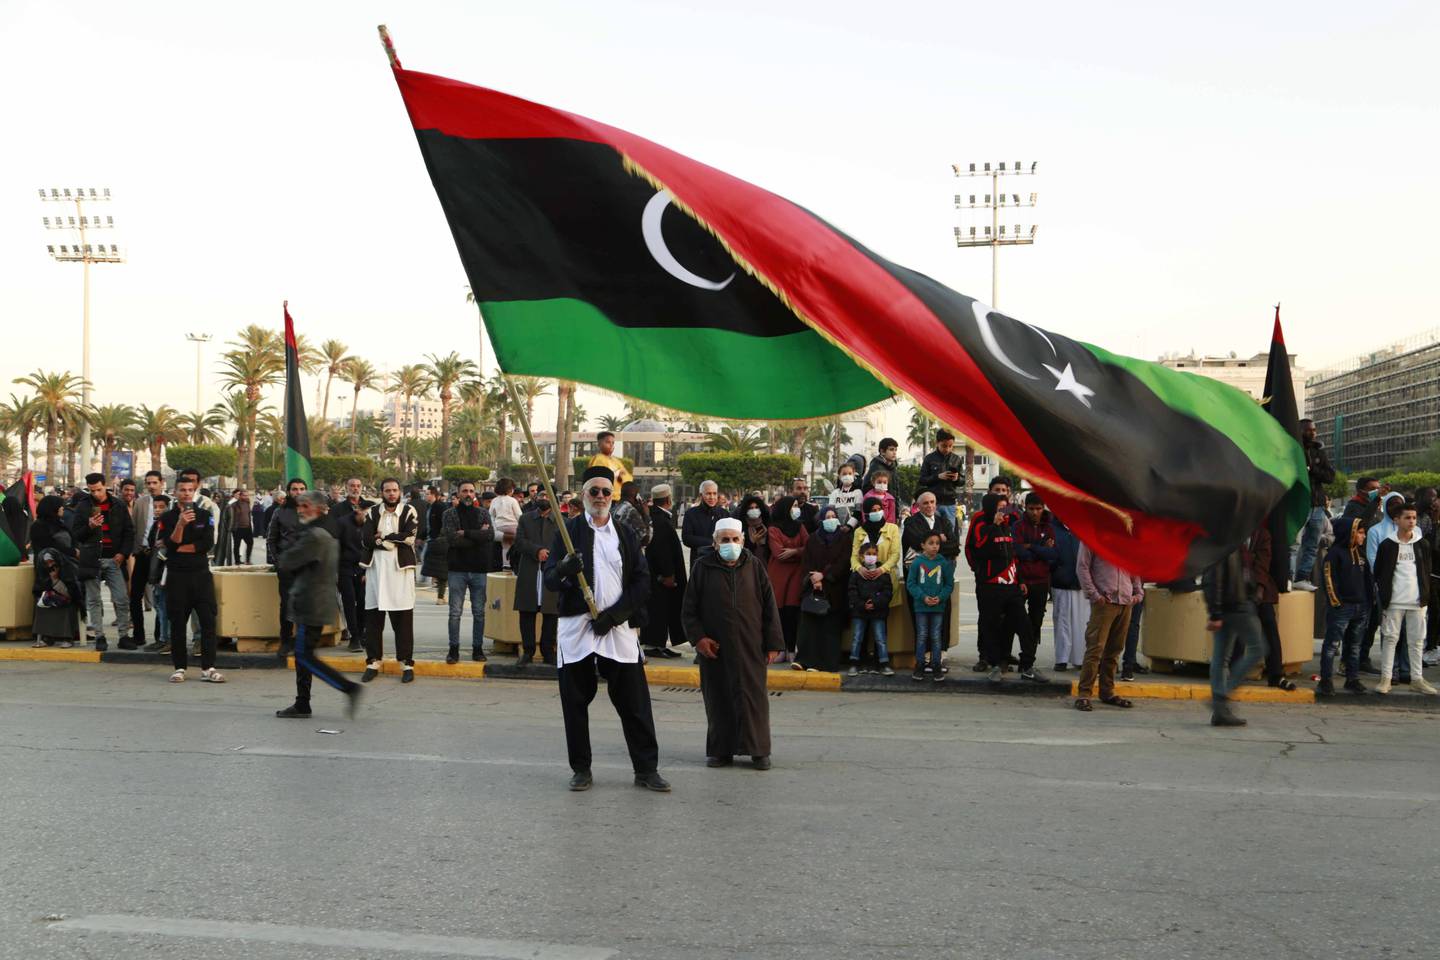 Libyans celebrate the 70th anniversary of their country's independence on the day presidential elections were scheduled to take place. AFP